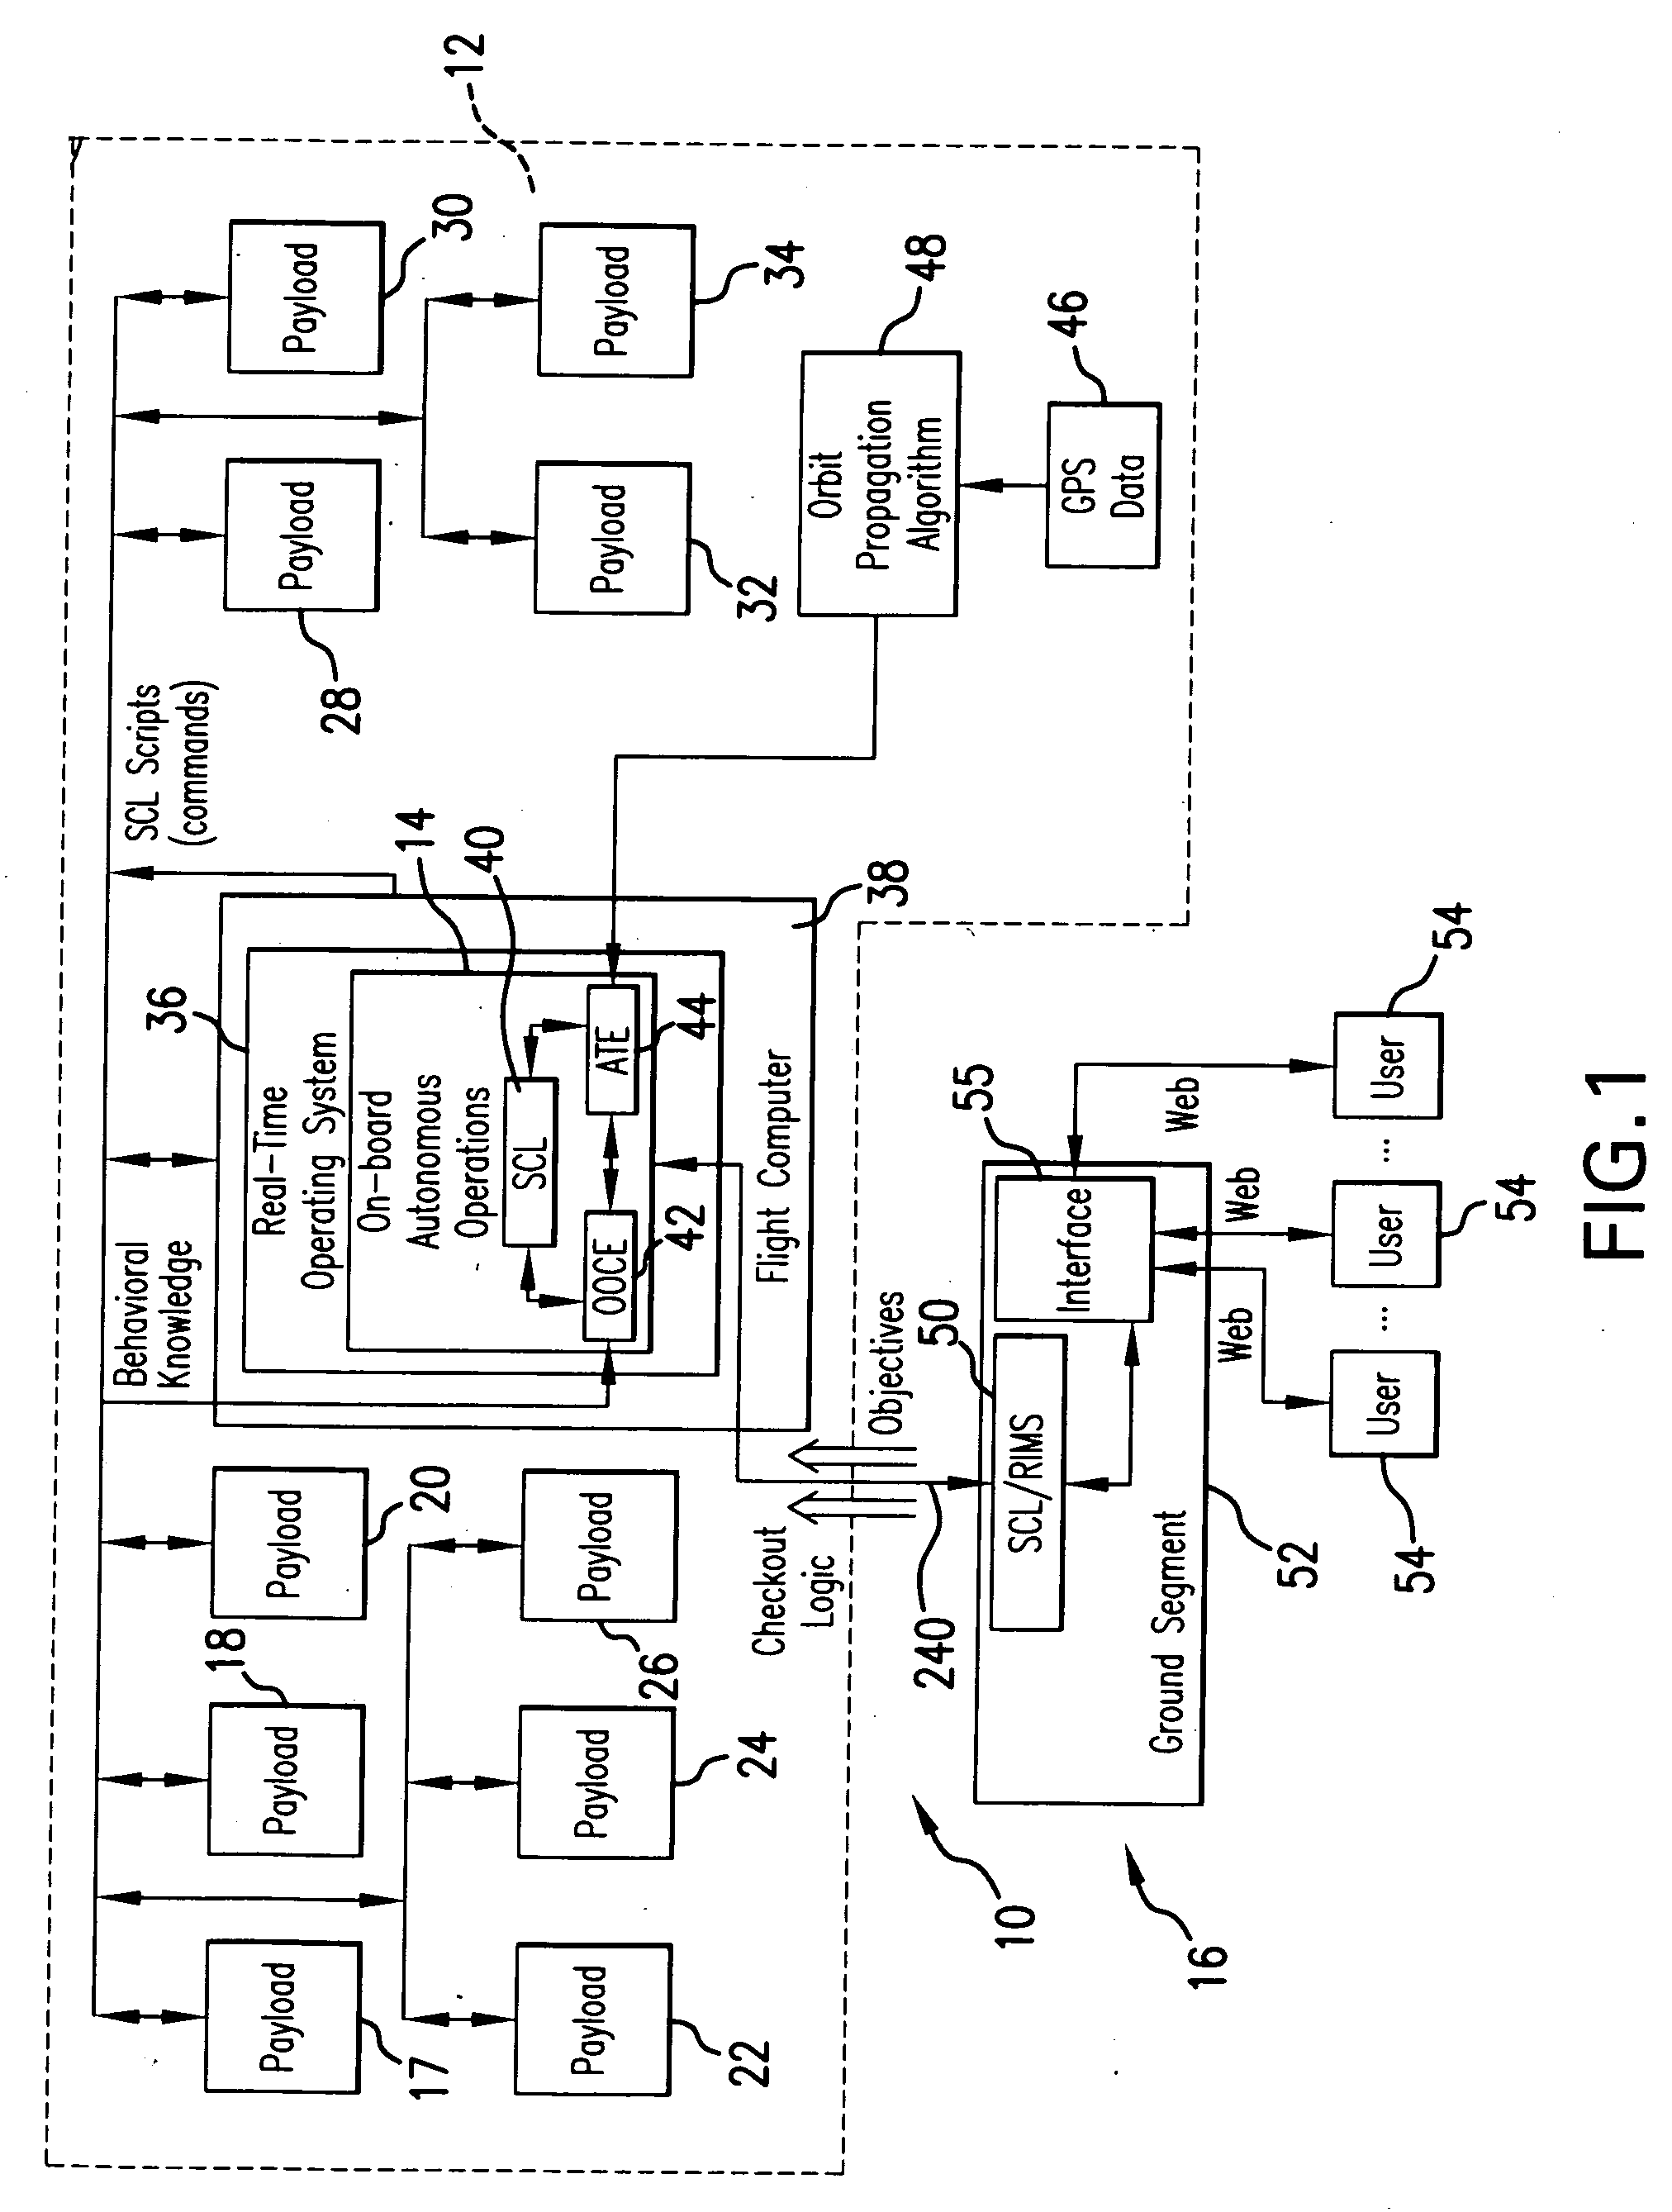 Intelligent system and method for spacecraft autonomous operations